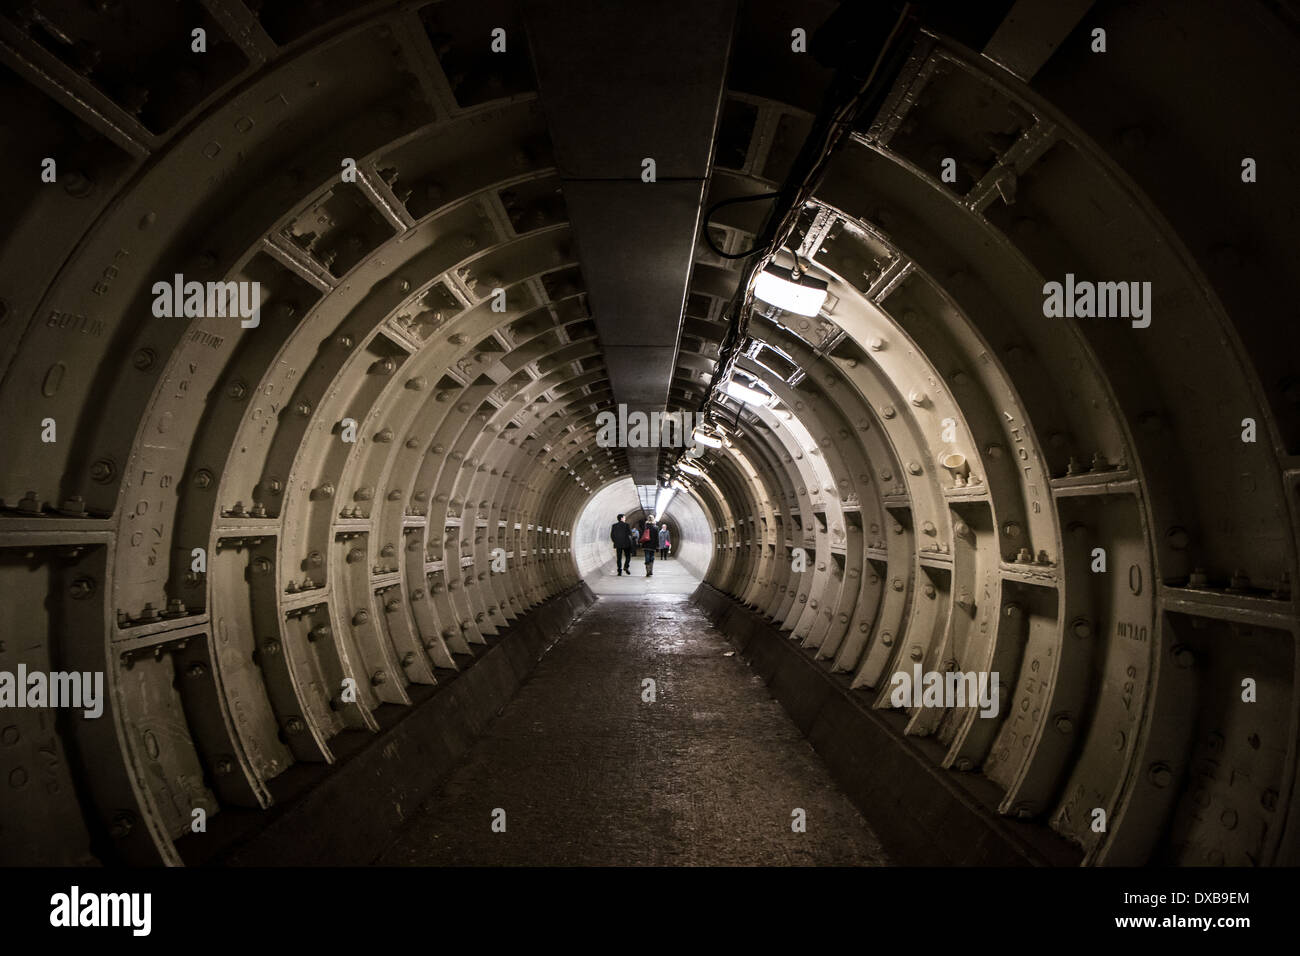 Dark tunnel with people in the distance, Stock Photo